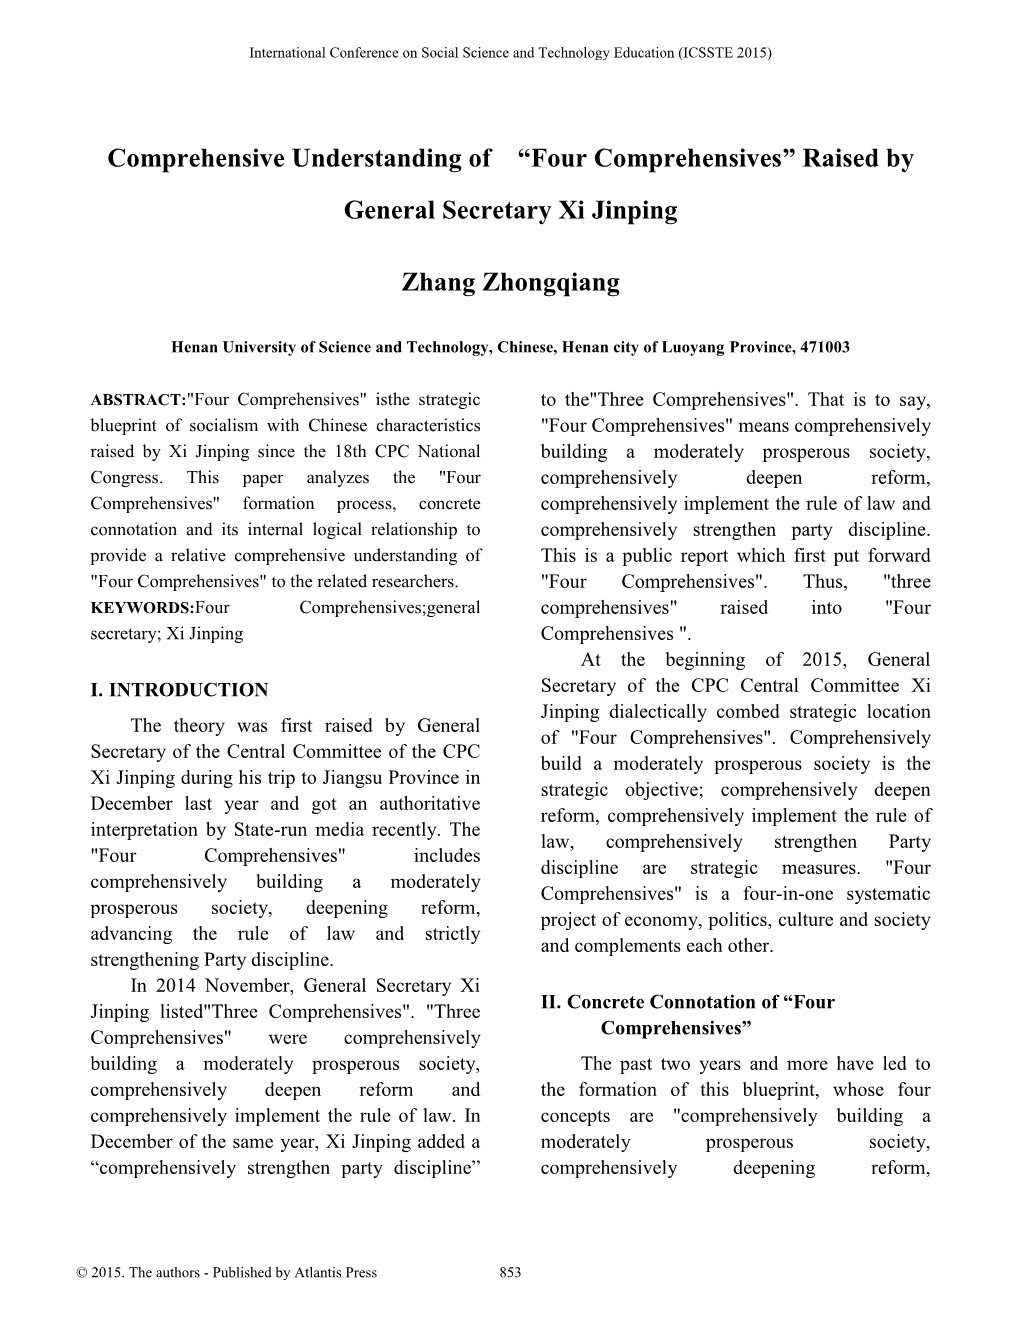 Four Comprehensives” Raised by General Secretary Xi Jinping